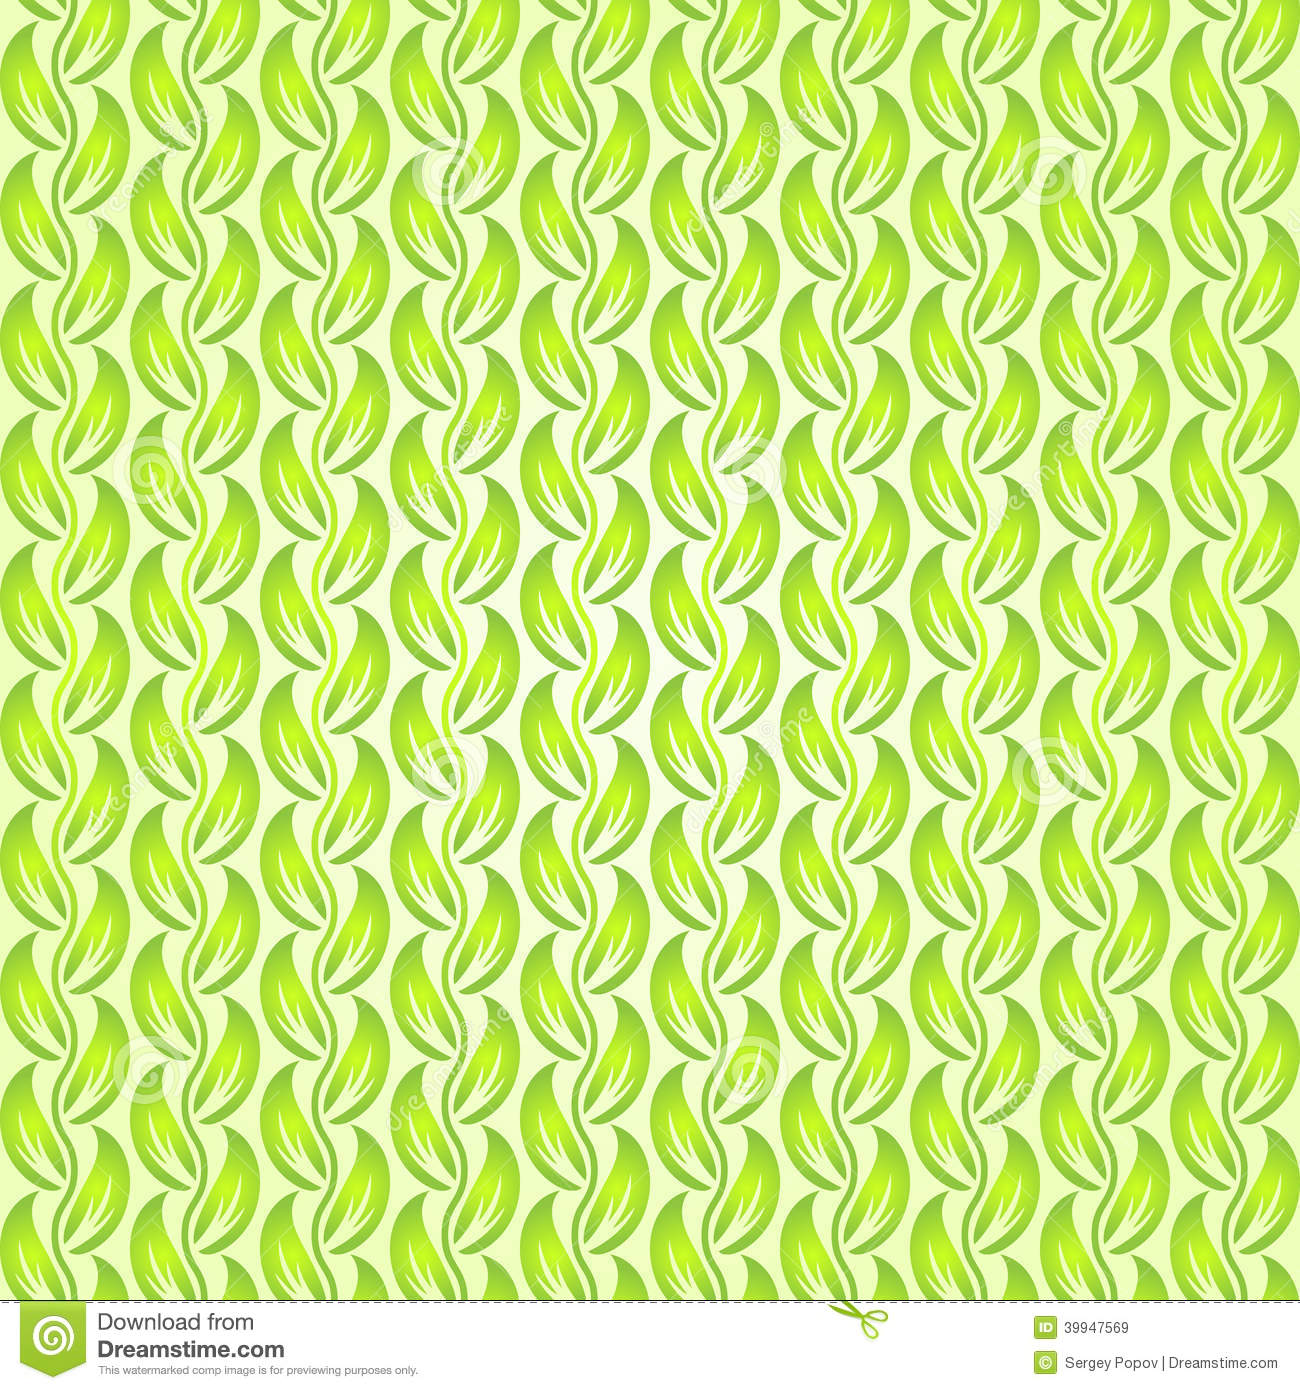 Abstract Leaf Pattern Vector